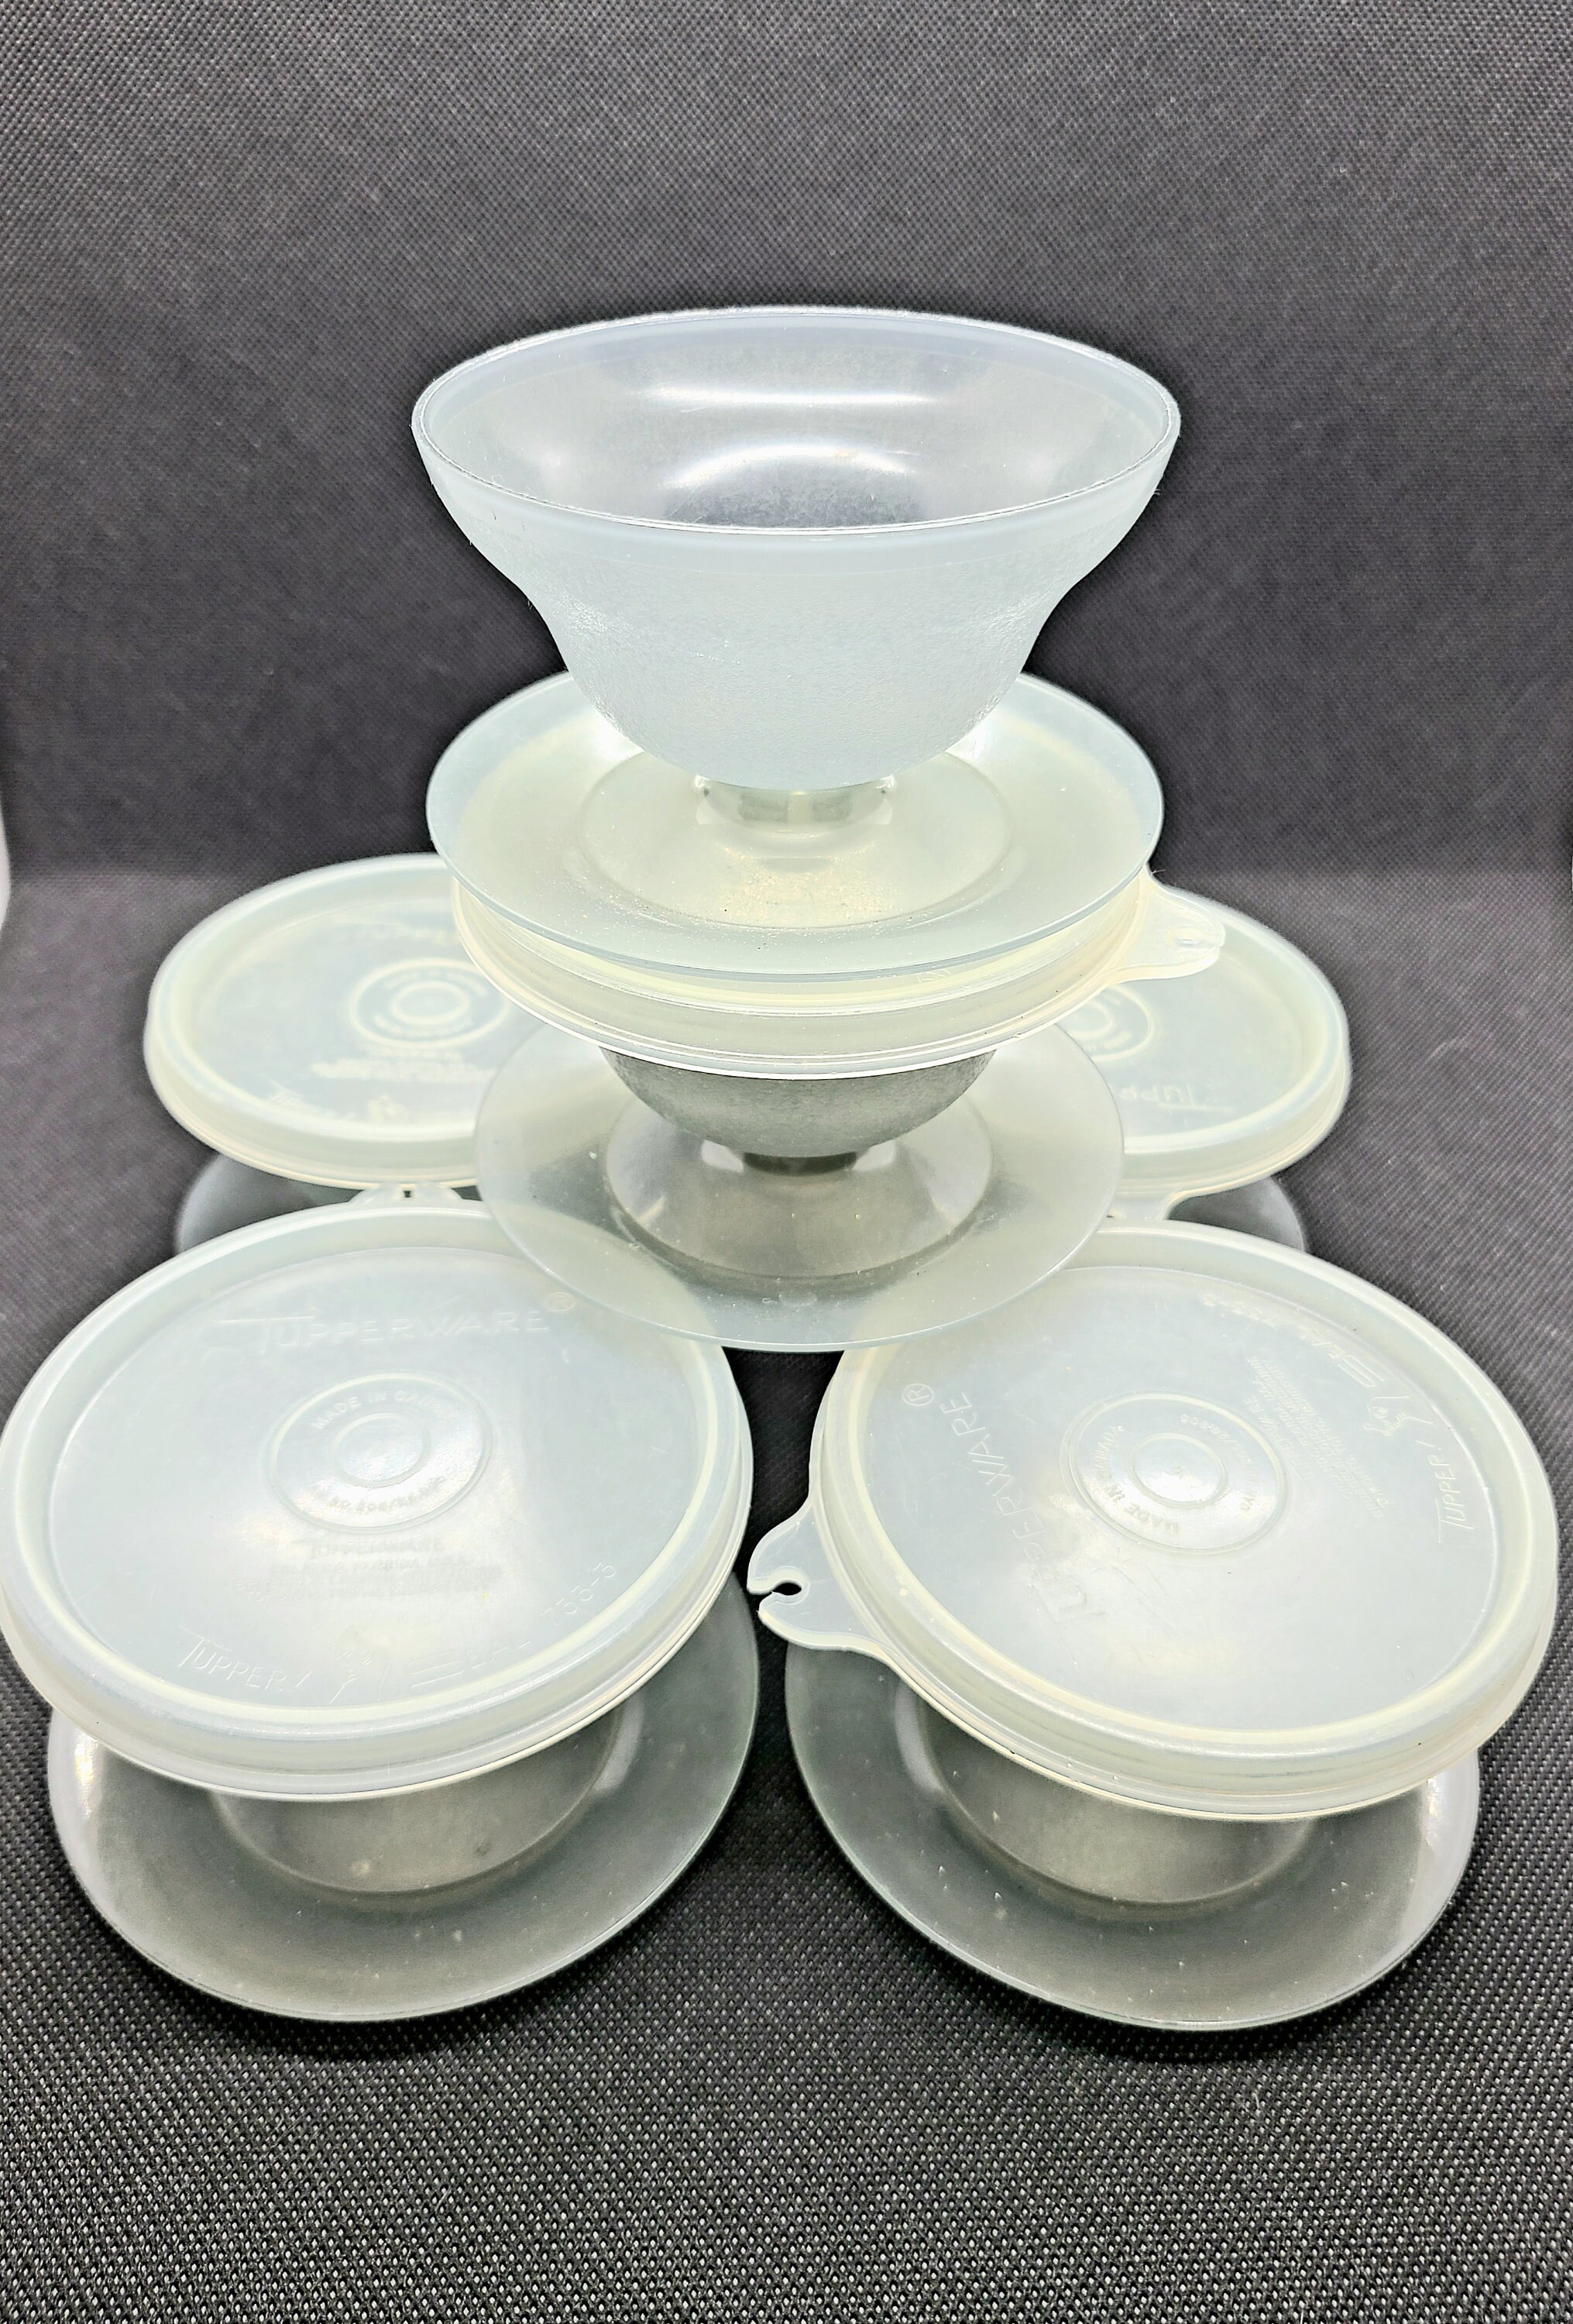 Vintage Tupperware 754 Dessert Cups With Lids Set of 6 - Etsy